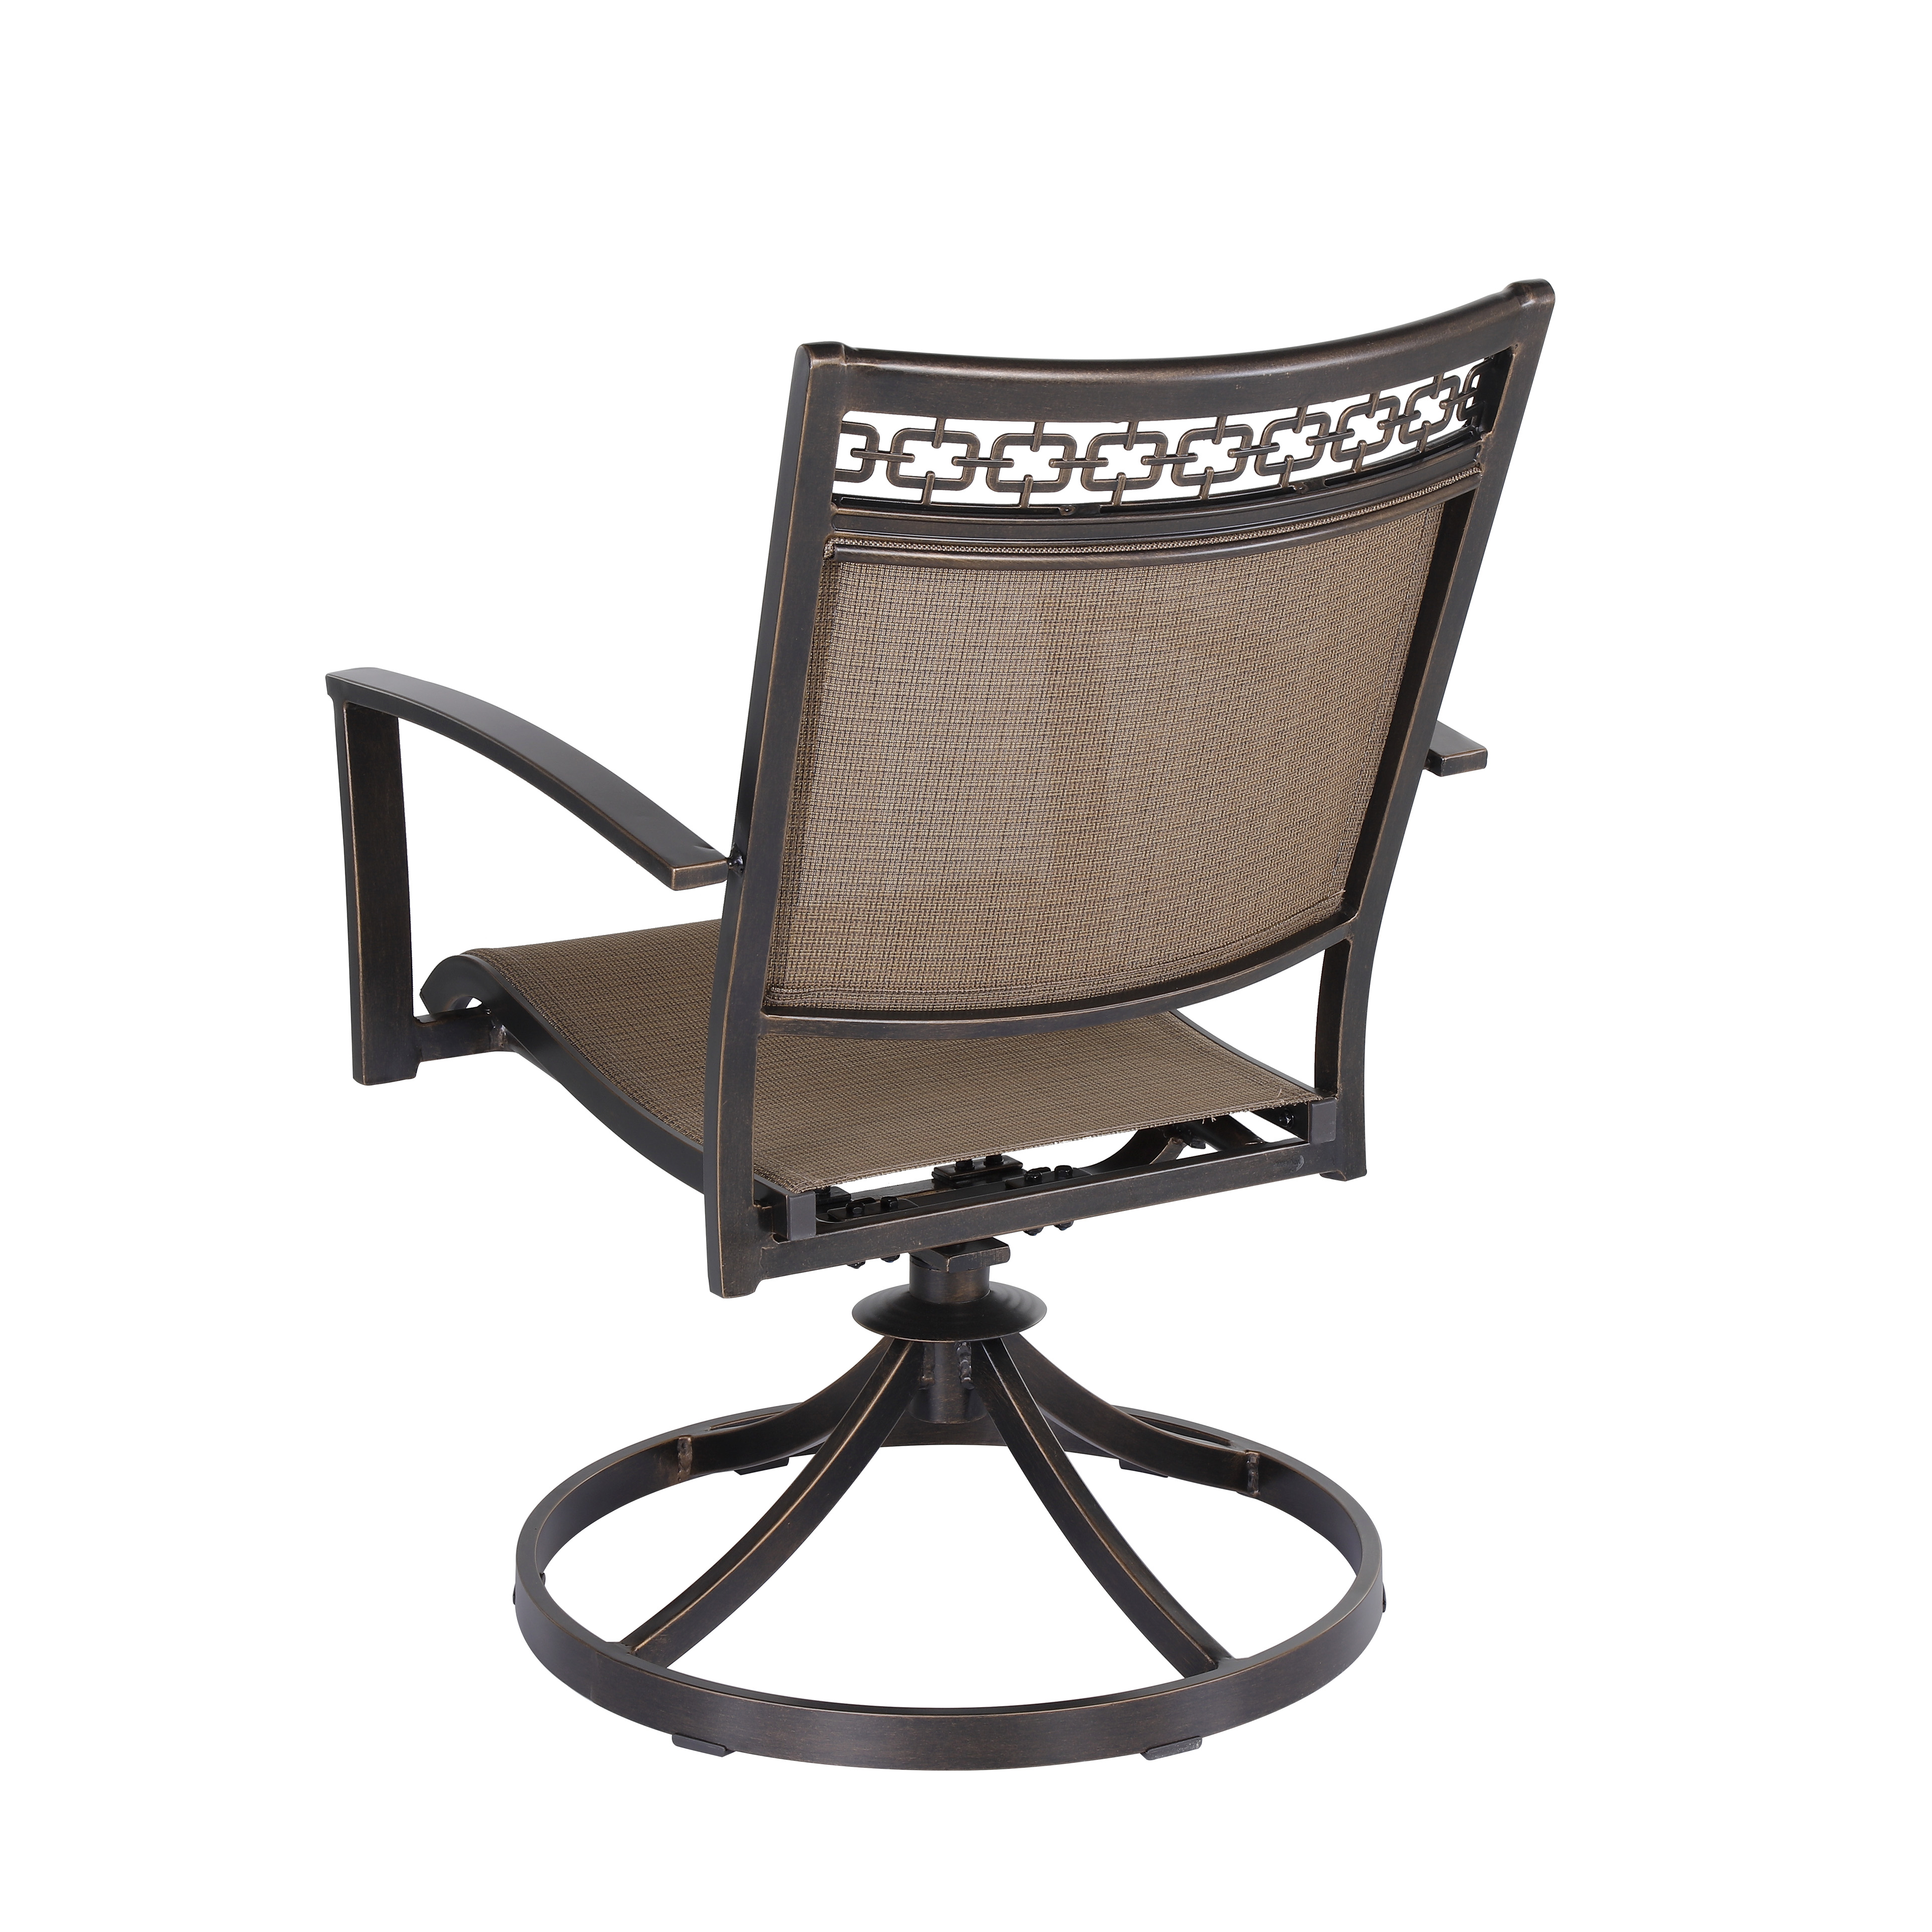 All Weather Patio Dining Chair, Sling Fabric Swivel Rocker With Rustproof Finish Aluminum Frame, Outdoor Garden Furniture 2 Pieces Sets - image 5 of 11